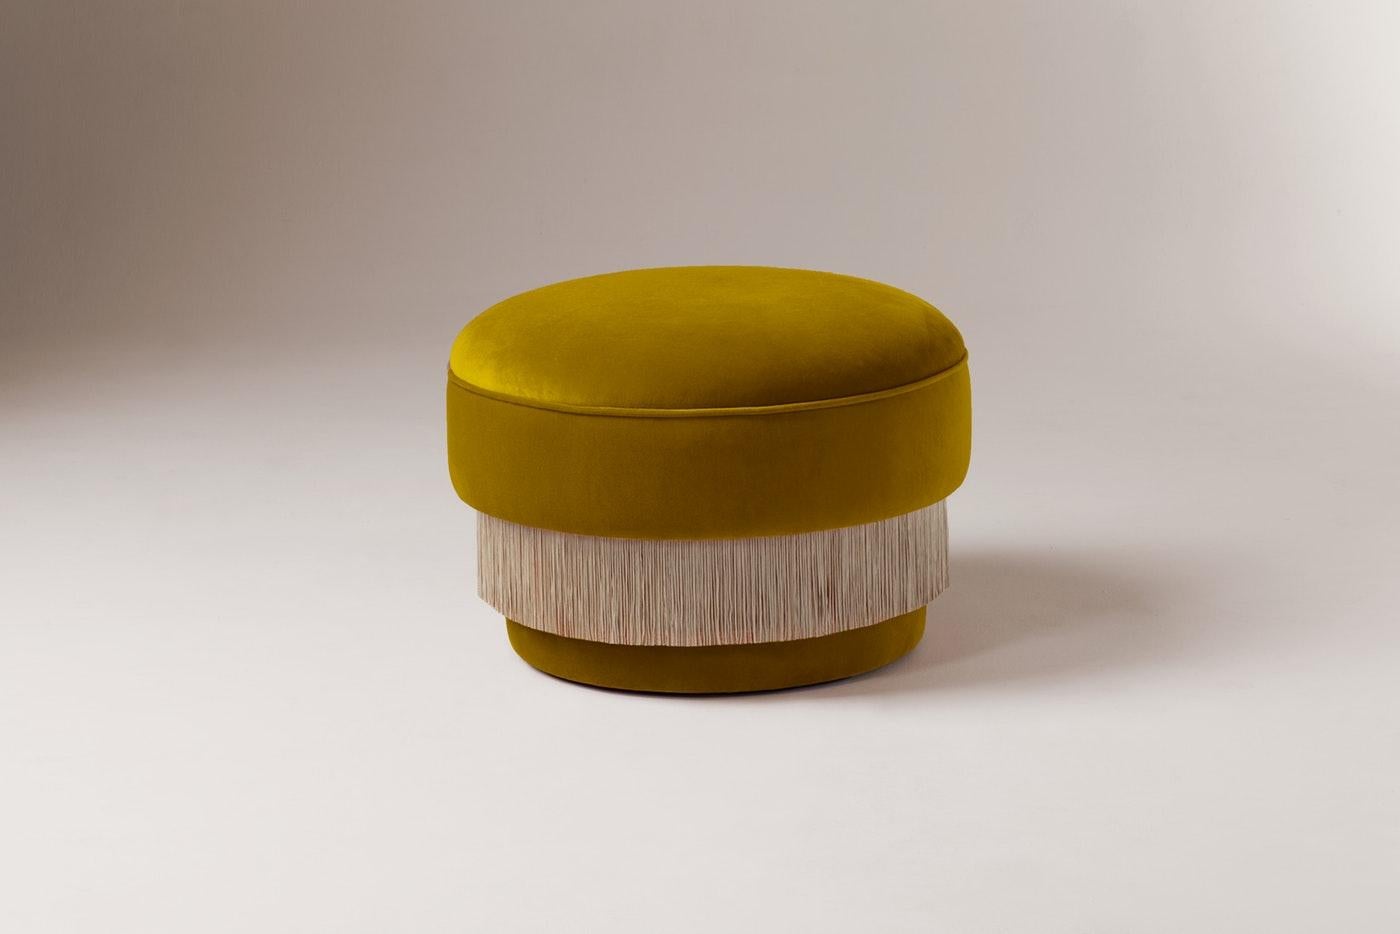 Folie pouf by Dooq
Measures: Ø 64 cm 25”
H 44 cm 17”

Materials: Upholstery and piping fabric or leather

Dooq is a design company dedicated to celebrate the luxury of living. Creating designs that stimulate the senses, whose conceptual approach is